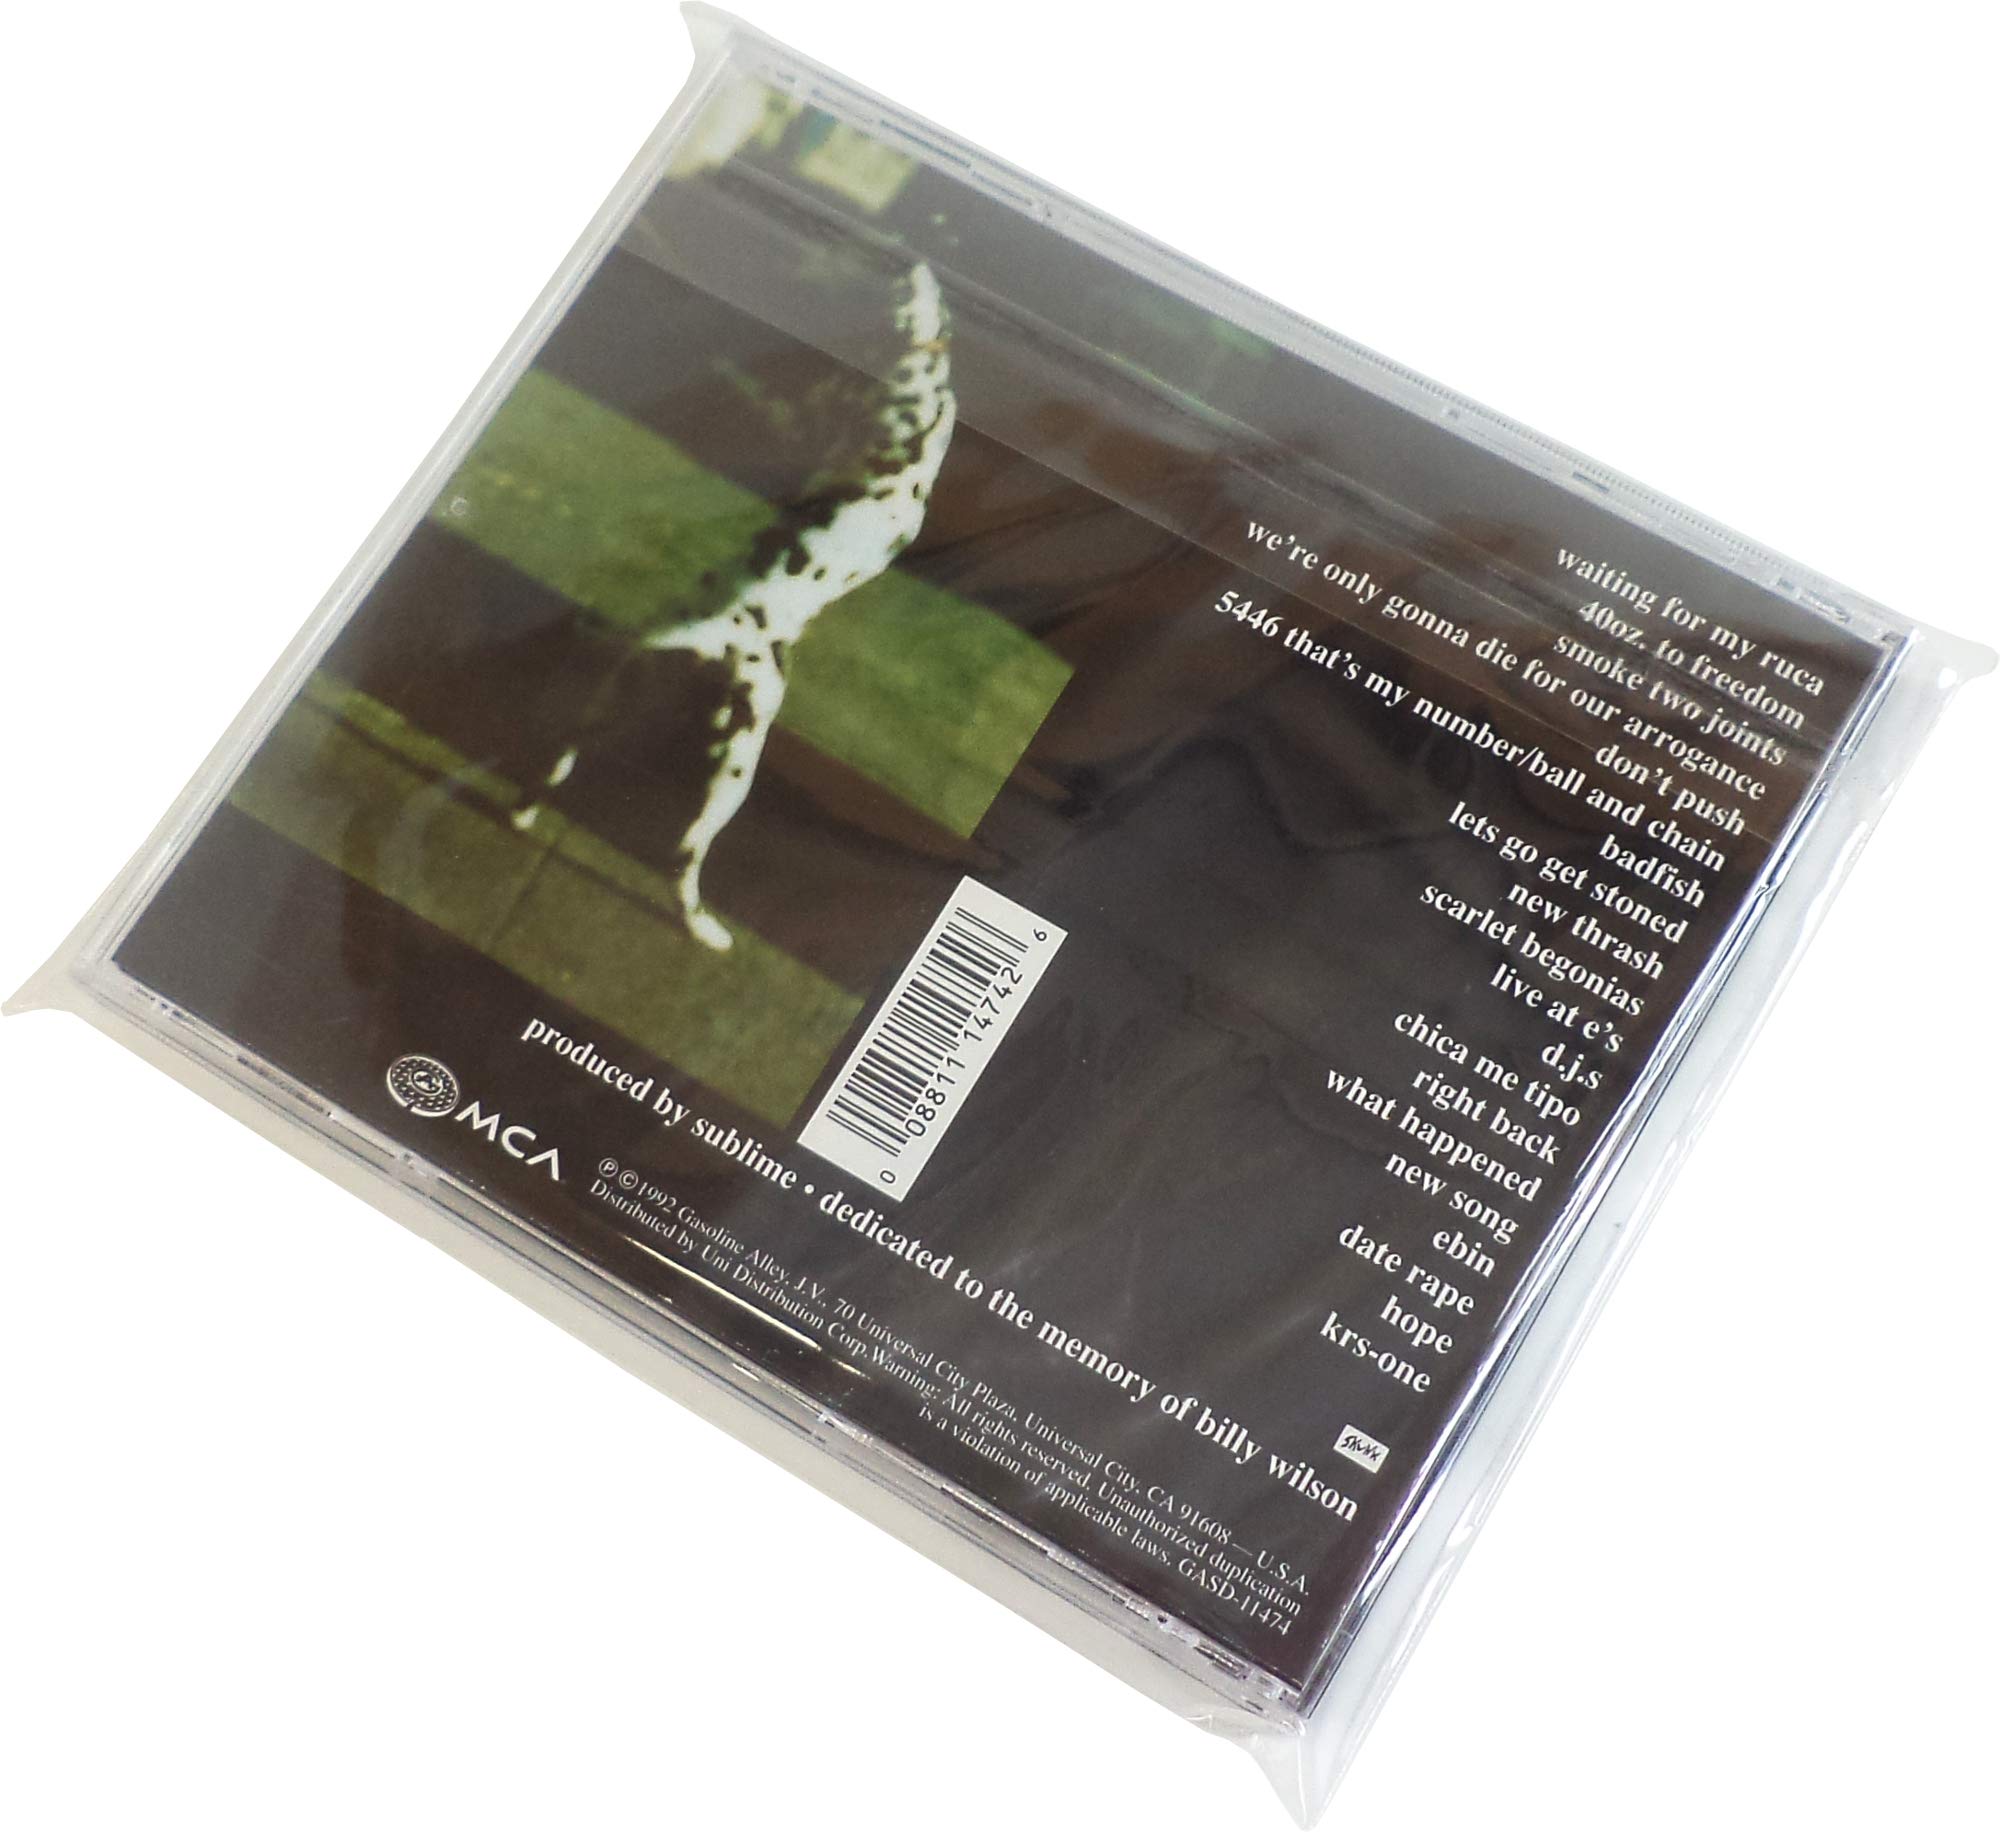 Square Deal Recordings & Supplies - CD Sleeves - RESEALABLE Premium 2mil Thick - Archival Quality, Crystal Clear - Holds 1 Standard 10.4mm CD Jewel Box (1000 Sleeves)